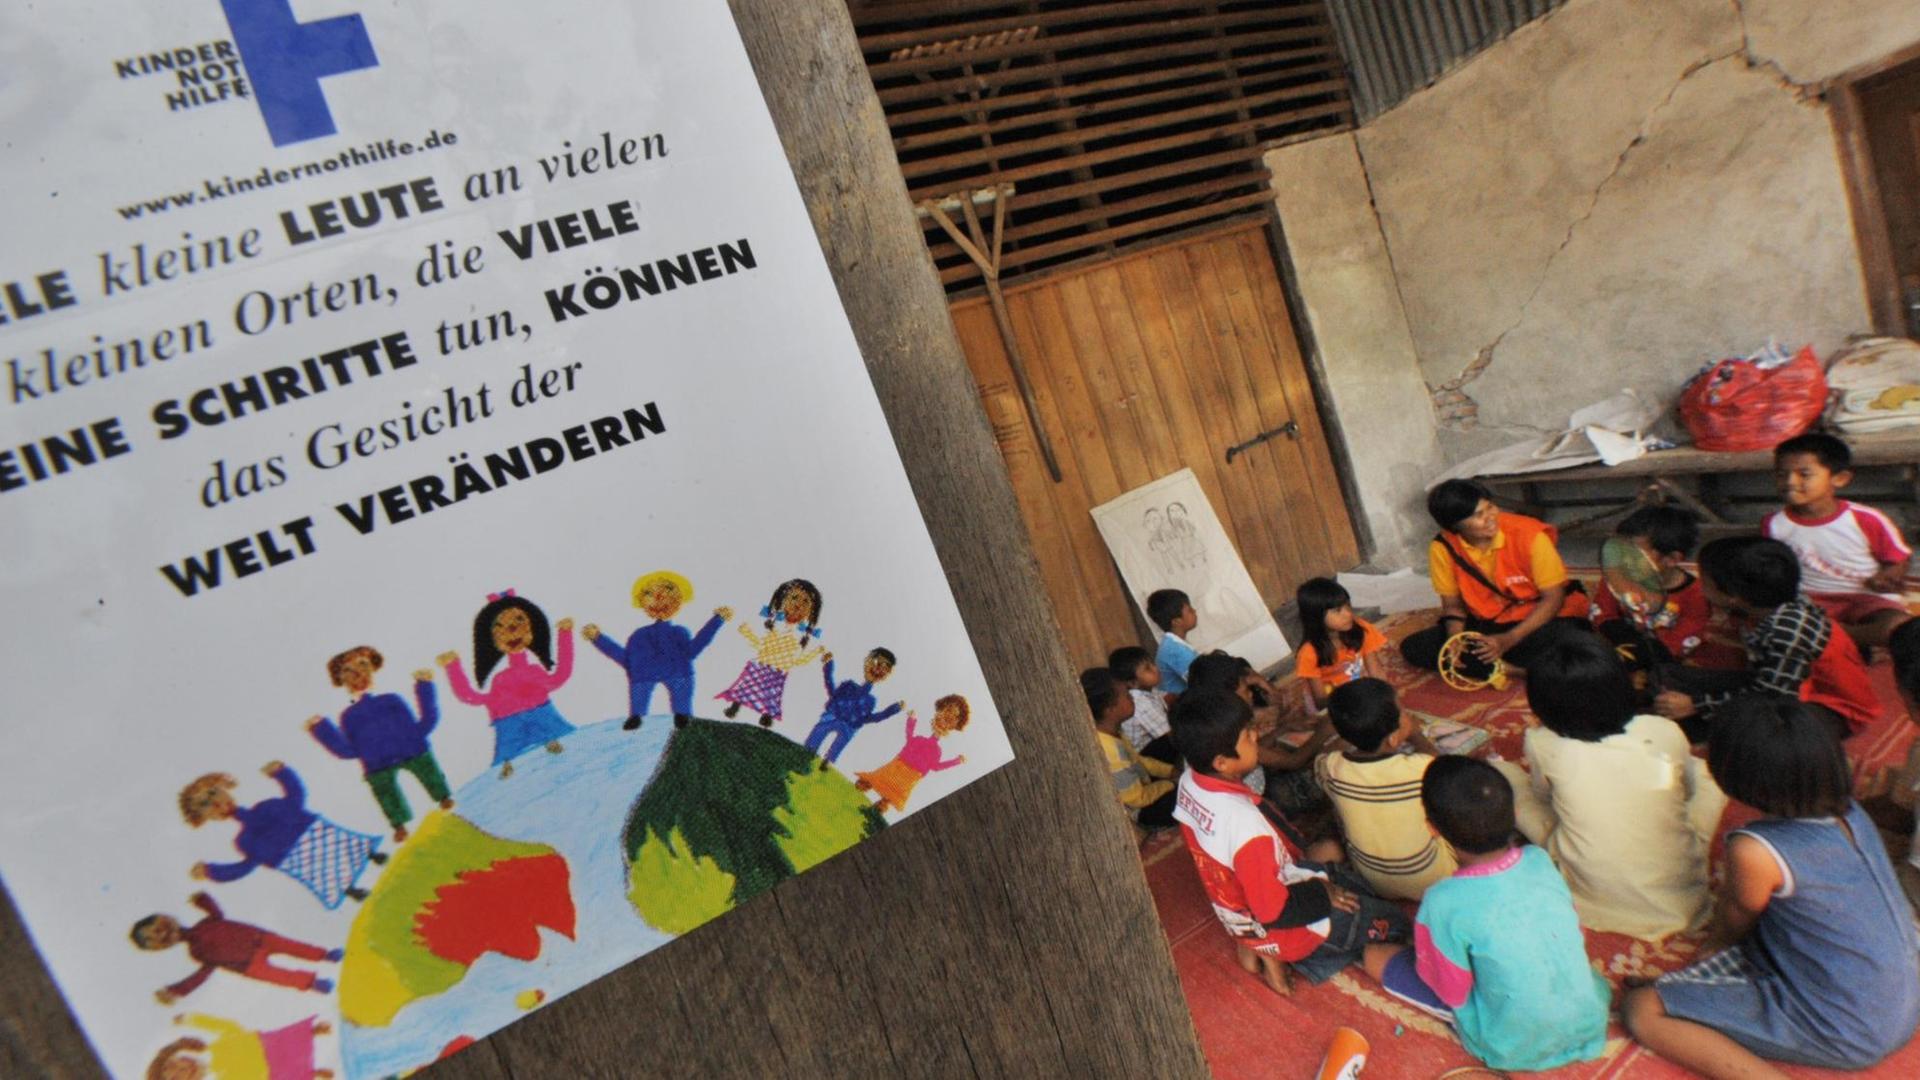 To go with Indonesia-quake-aid-children by Aubrey Belford In a picture taken on October 8, 2009 a poster for German-based Christian charitable organisation Kindernothilfe adorns the wall as a volunteer plays games with the children of Pasadama village in Pariaman following the recent 7.6-magnitude earthquake that struck the western coast of the island. Many child survivors of the huge earthquake on Sumatra island on September 30 have been left traumatised by a disaster that the United Nations says killed upwards of 1,100 people. As international aid pours in and authorities clean up buildings shattered in the quake, a small number of relief groups are working to repair widespread shock before it sets in and becomes lasting psychological damage. AFP PHOTO / BAY ISMOYO (Photo by BAY ISMOYO / AFP)